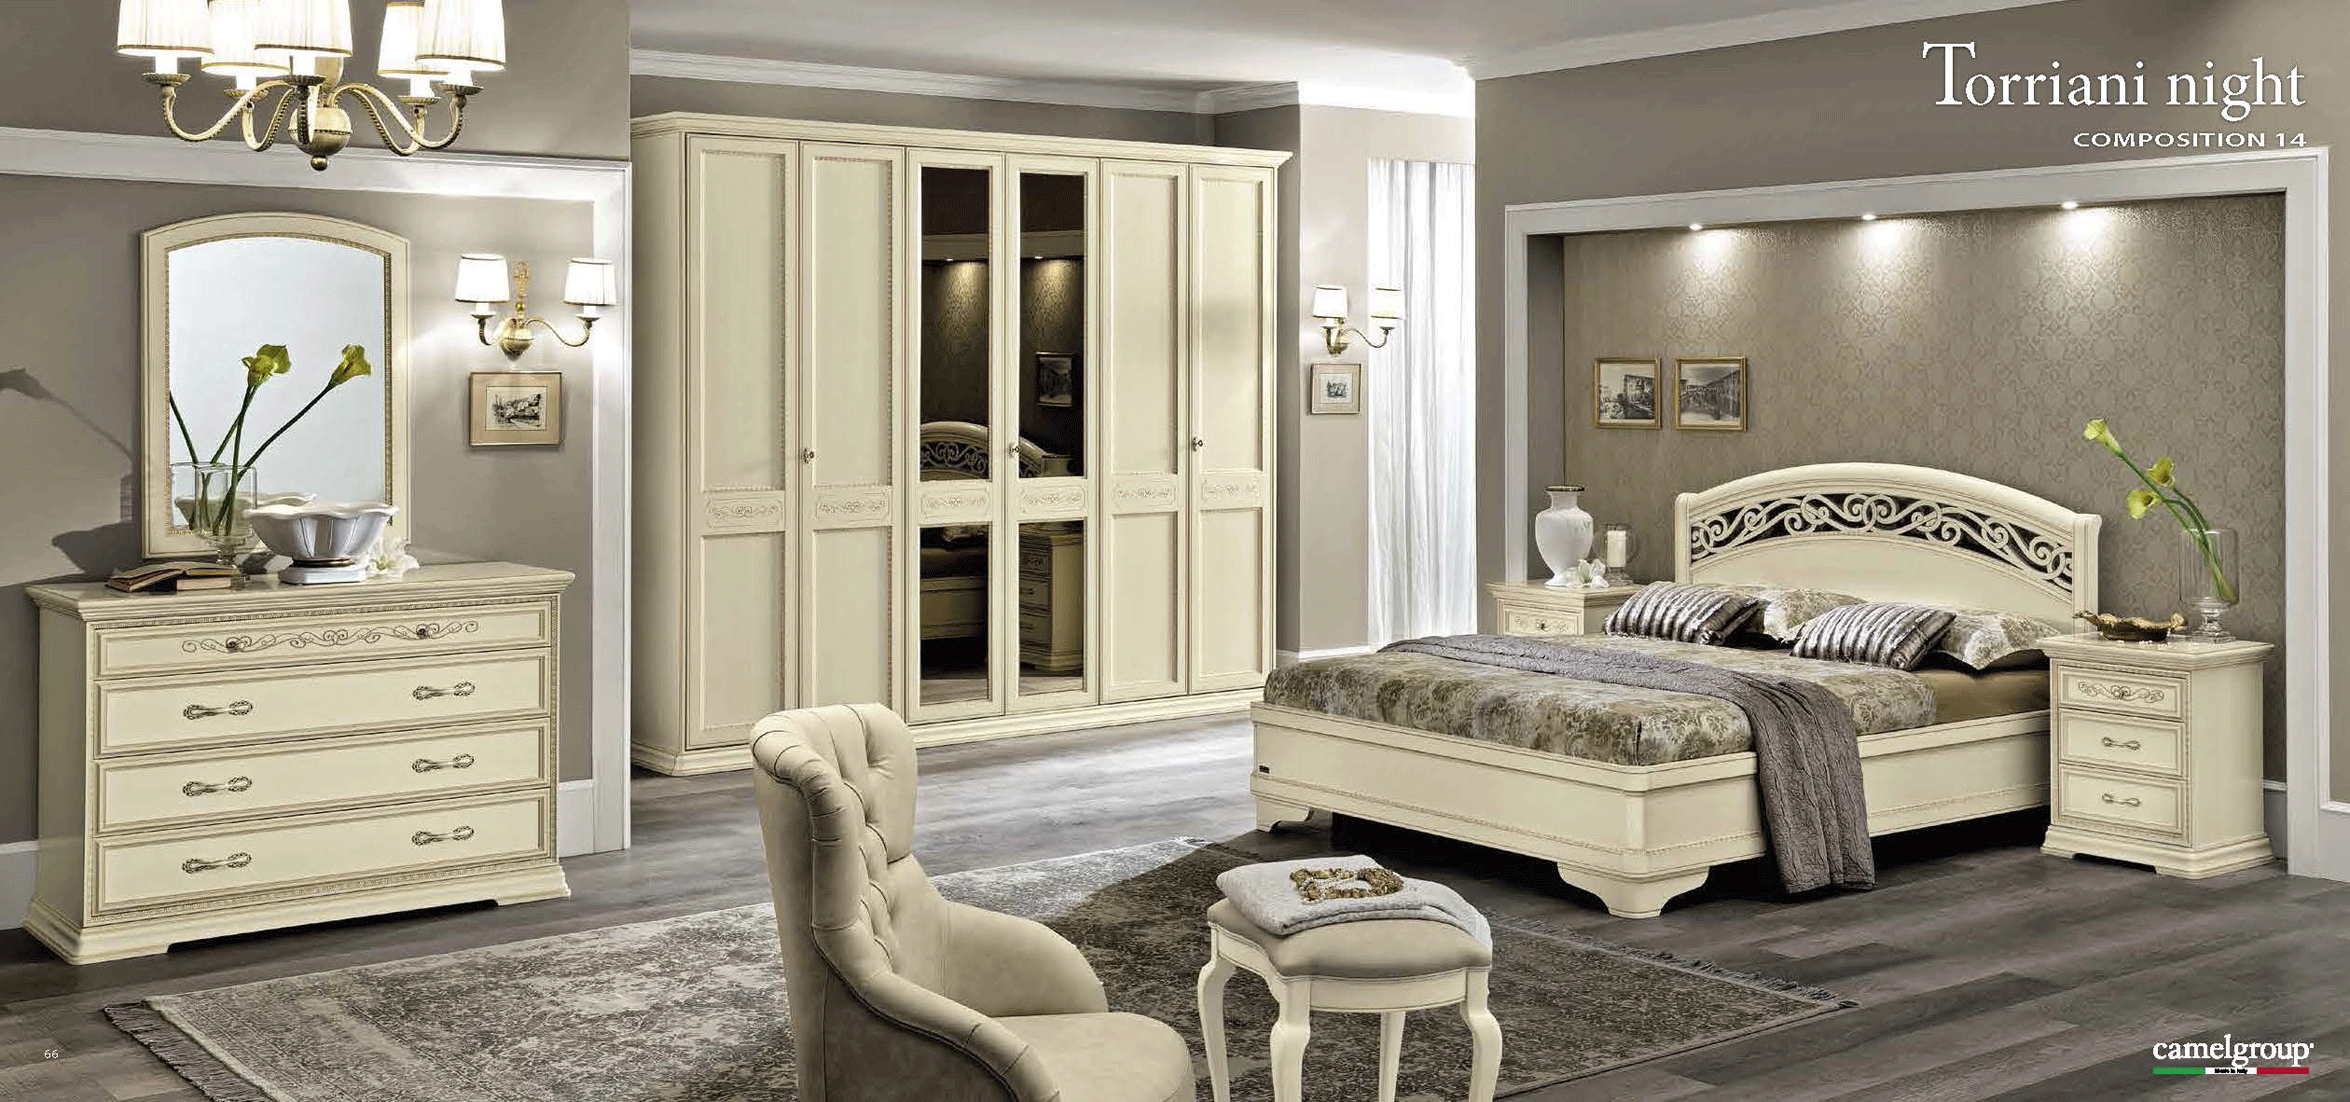 Bedroom Furniture Beds with storage Torriani Night